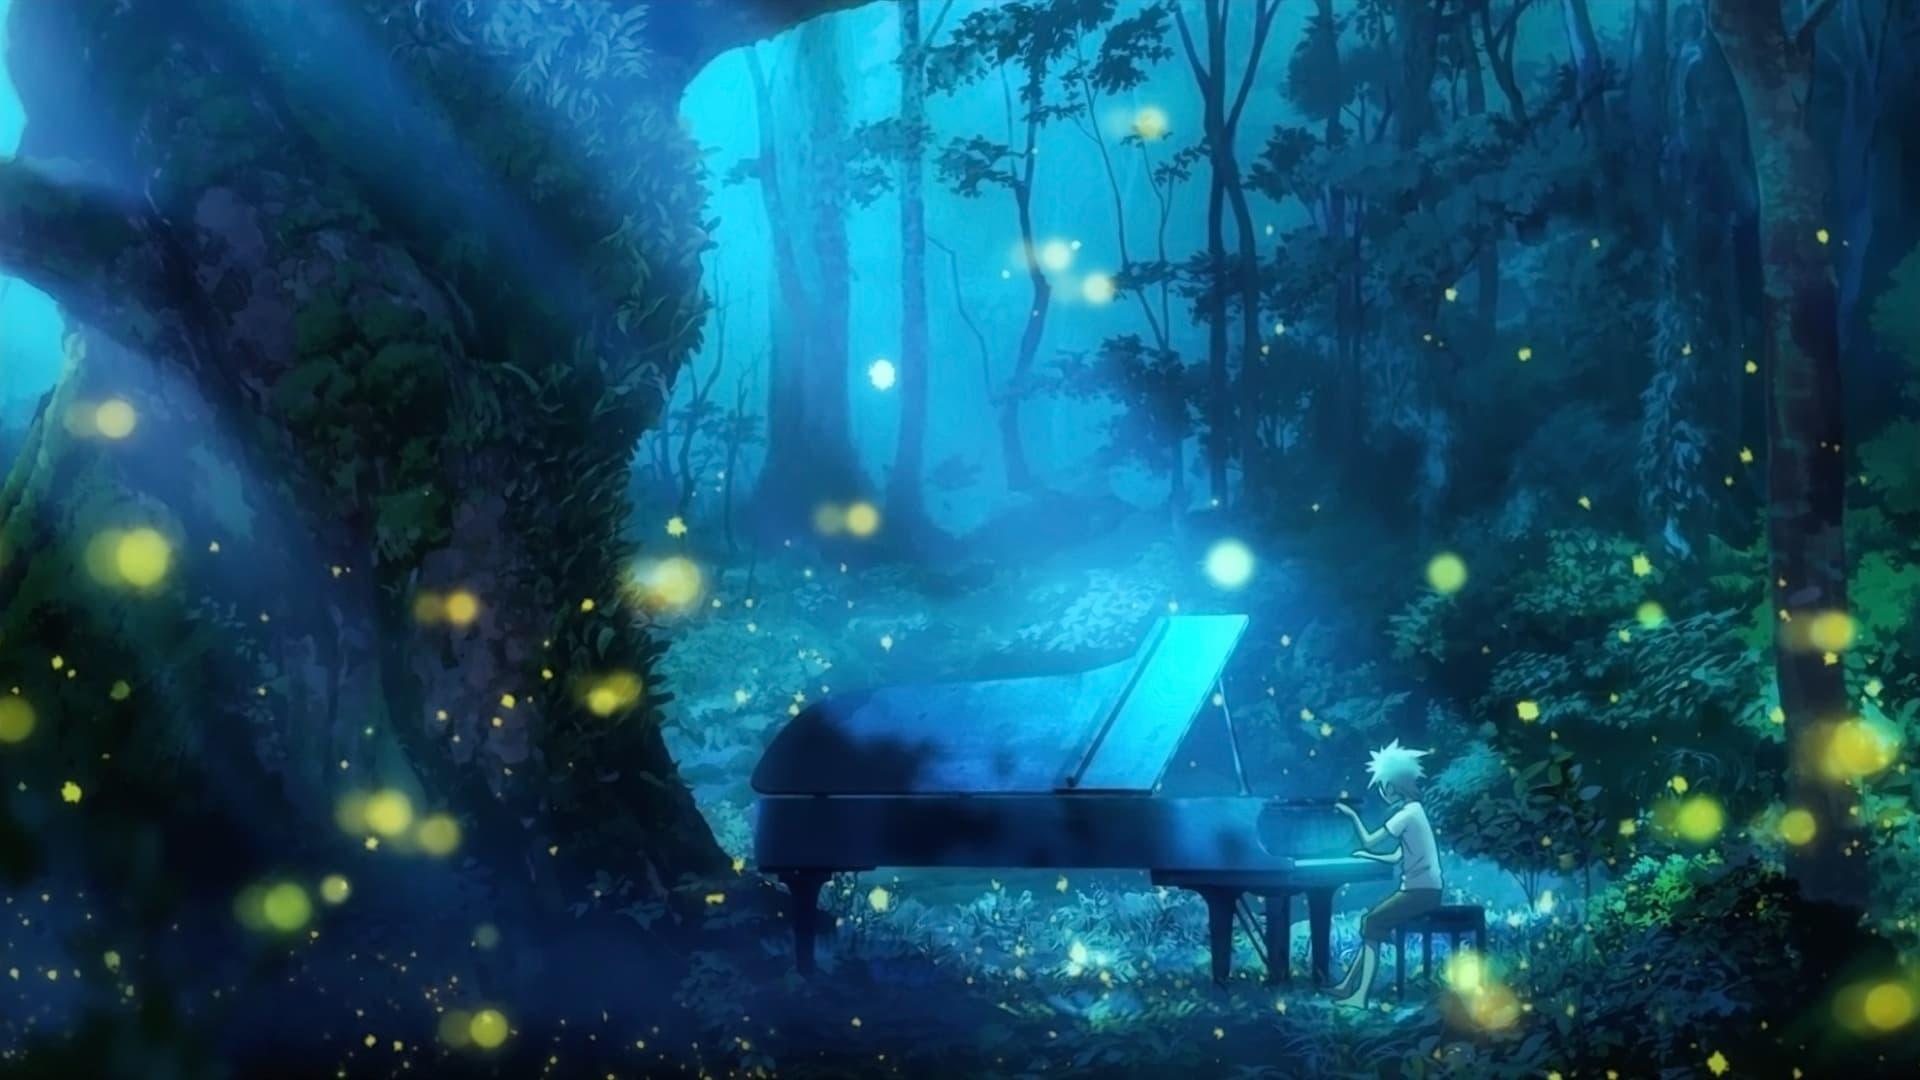 The Piano Forest backdrop